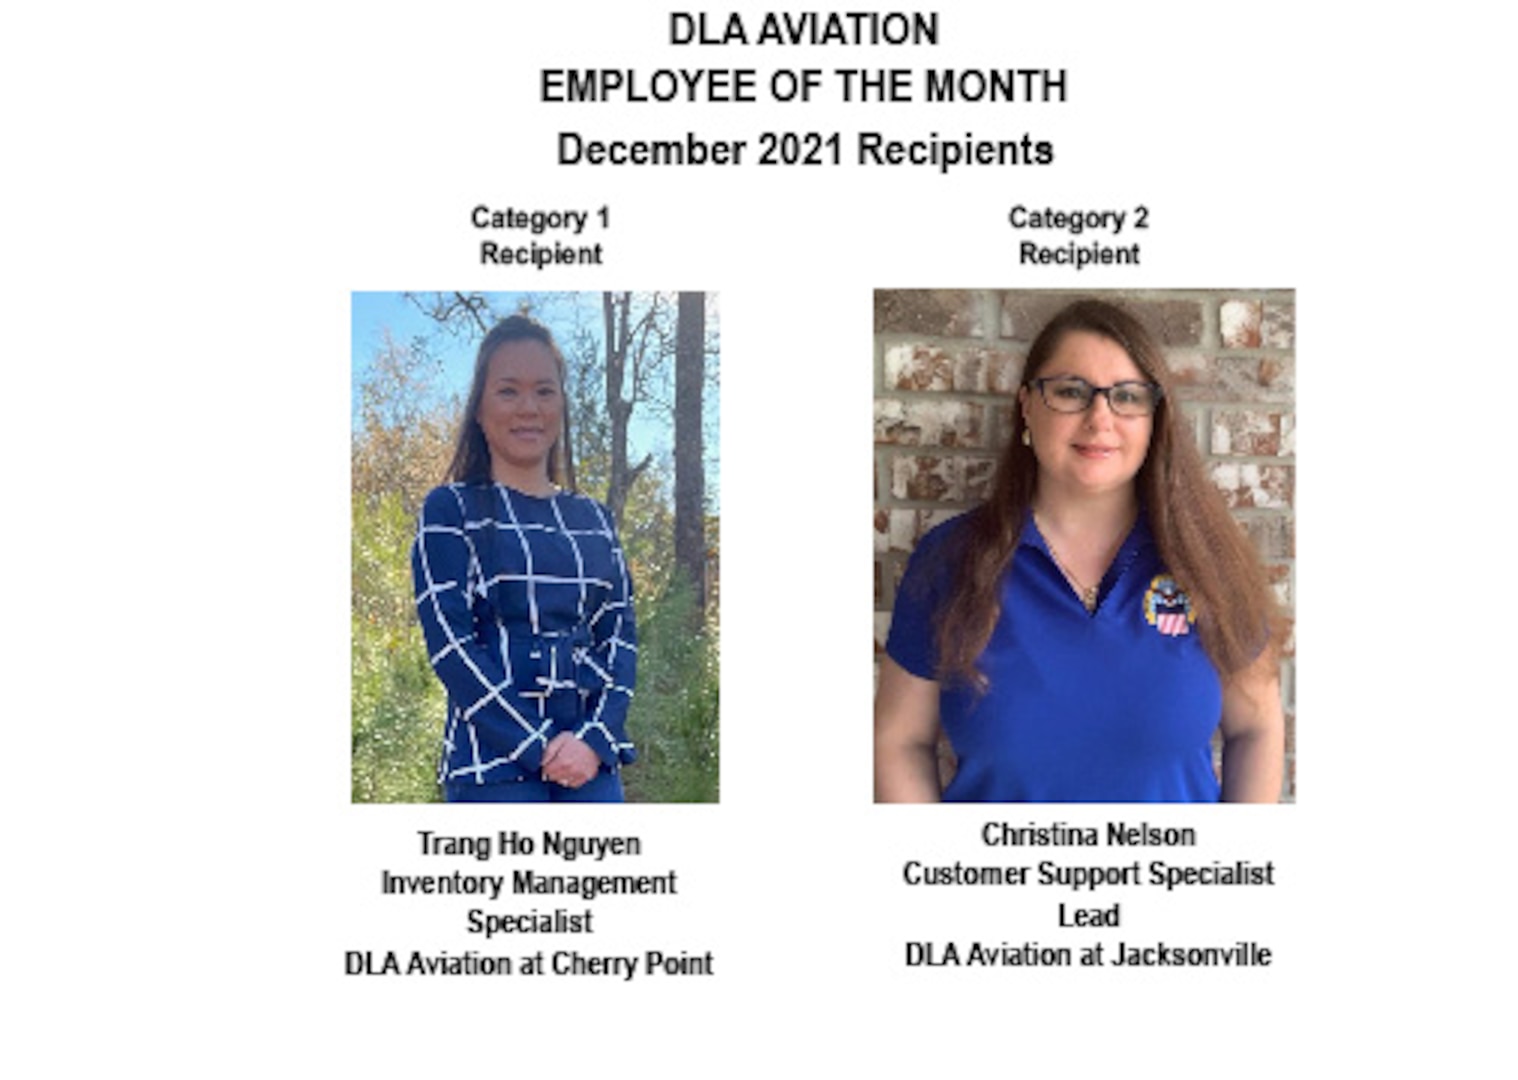 December employees of the month recognized for exemplary work performance